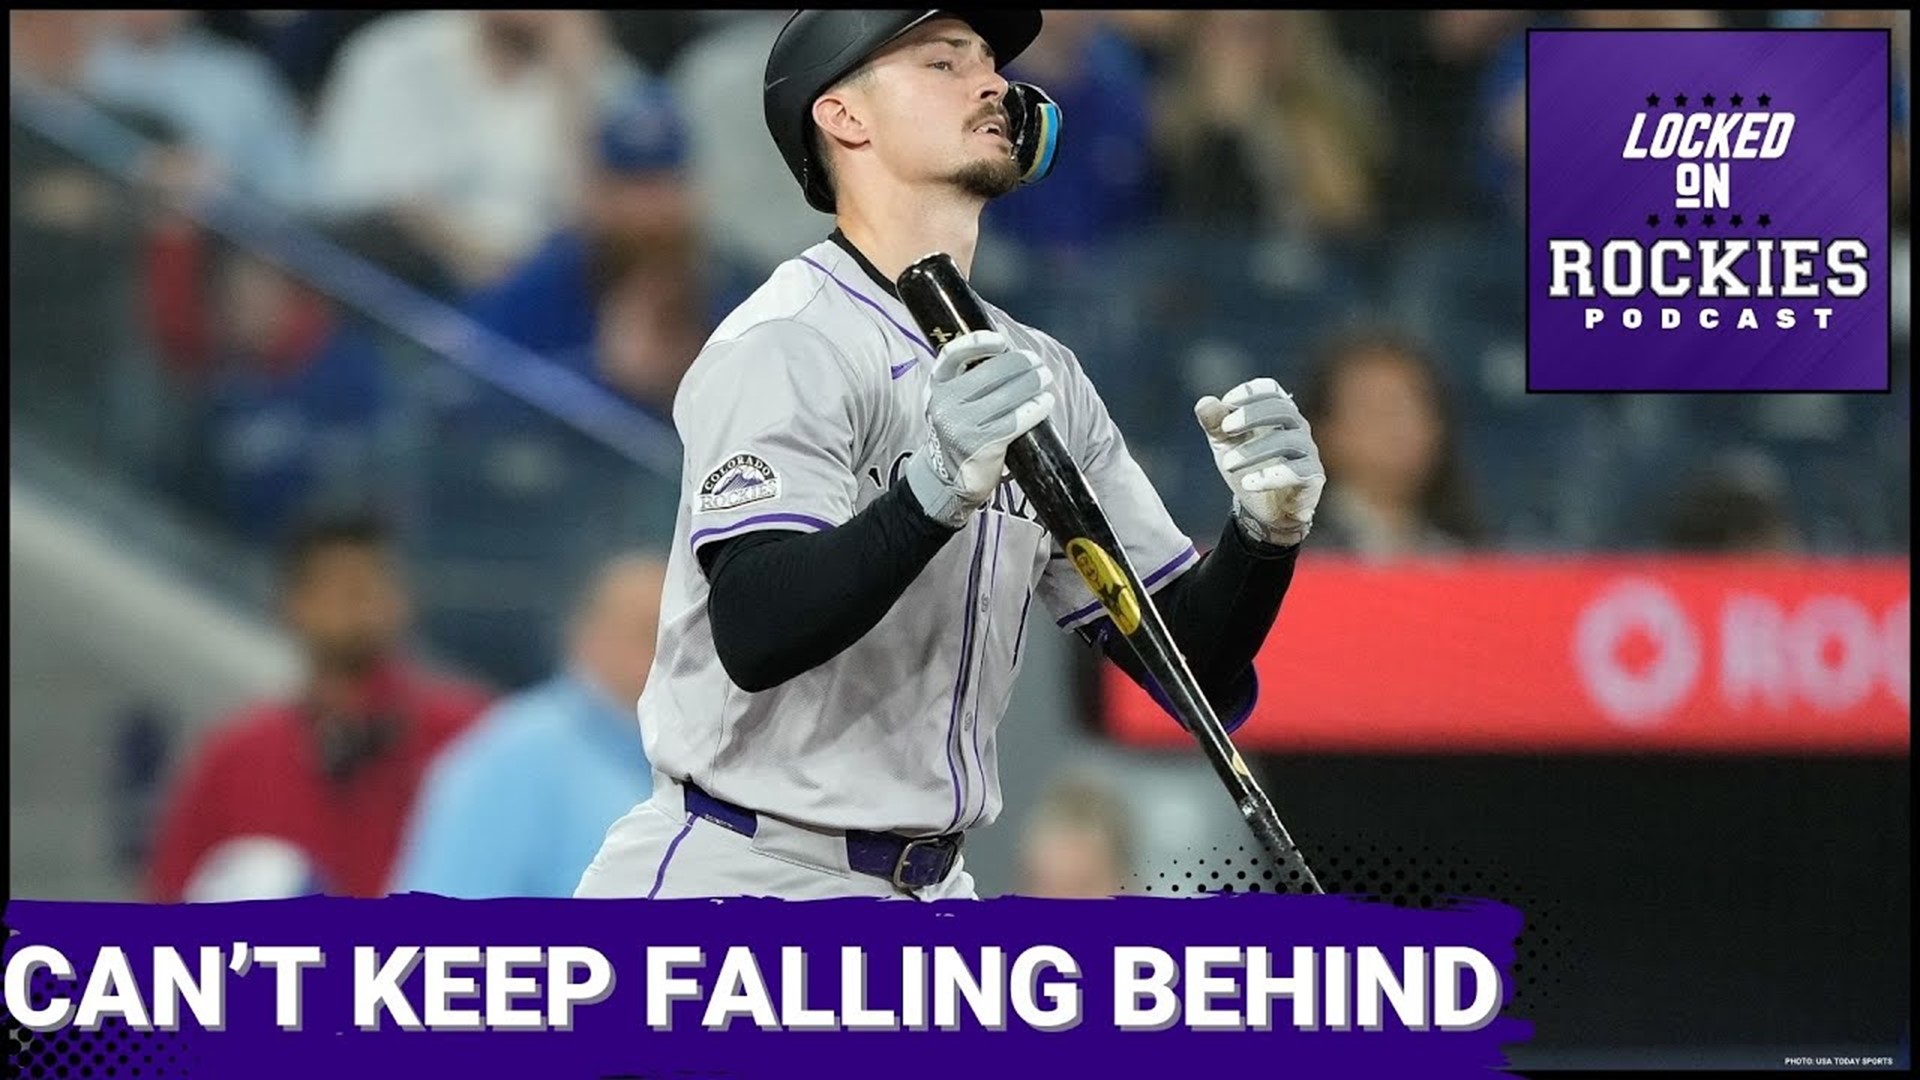 The Rockies continue to fall behind during the earliest stages of games, making pulling of wins even tougher